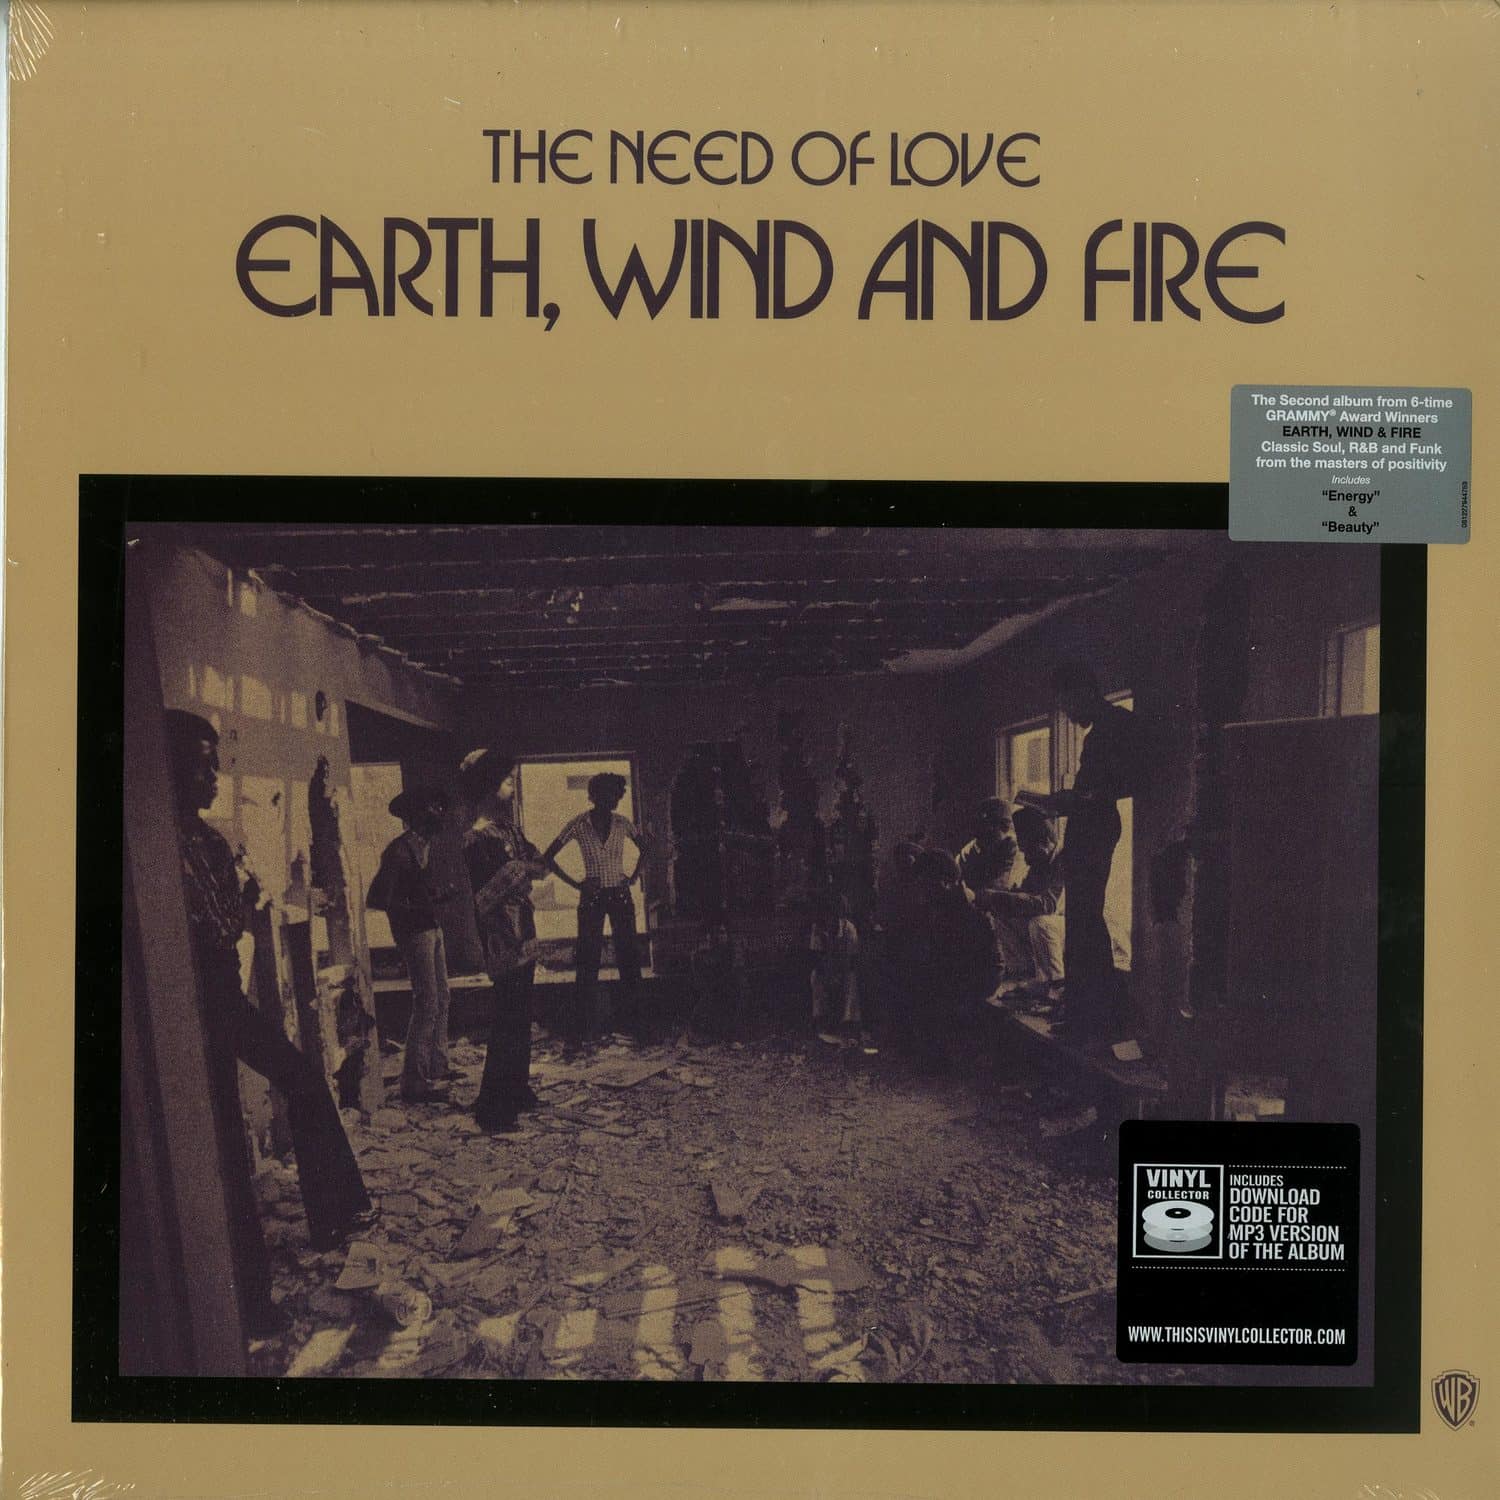 Earth, Wind and Fire - THE NEED OF LOVE 